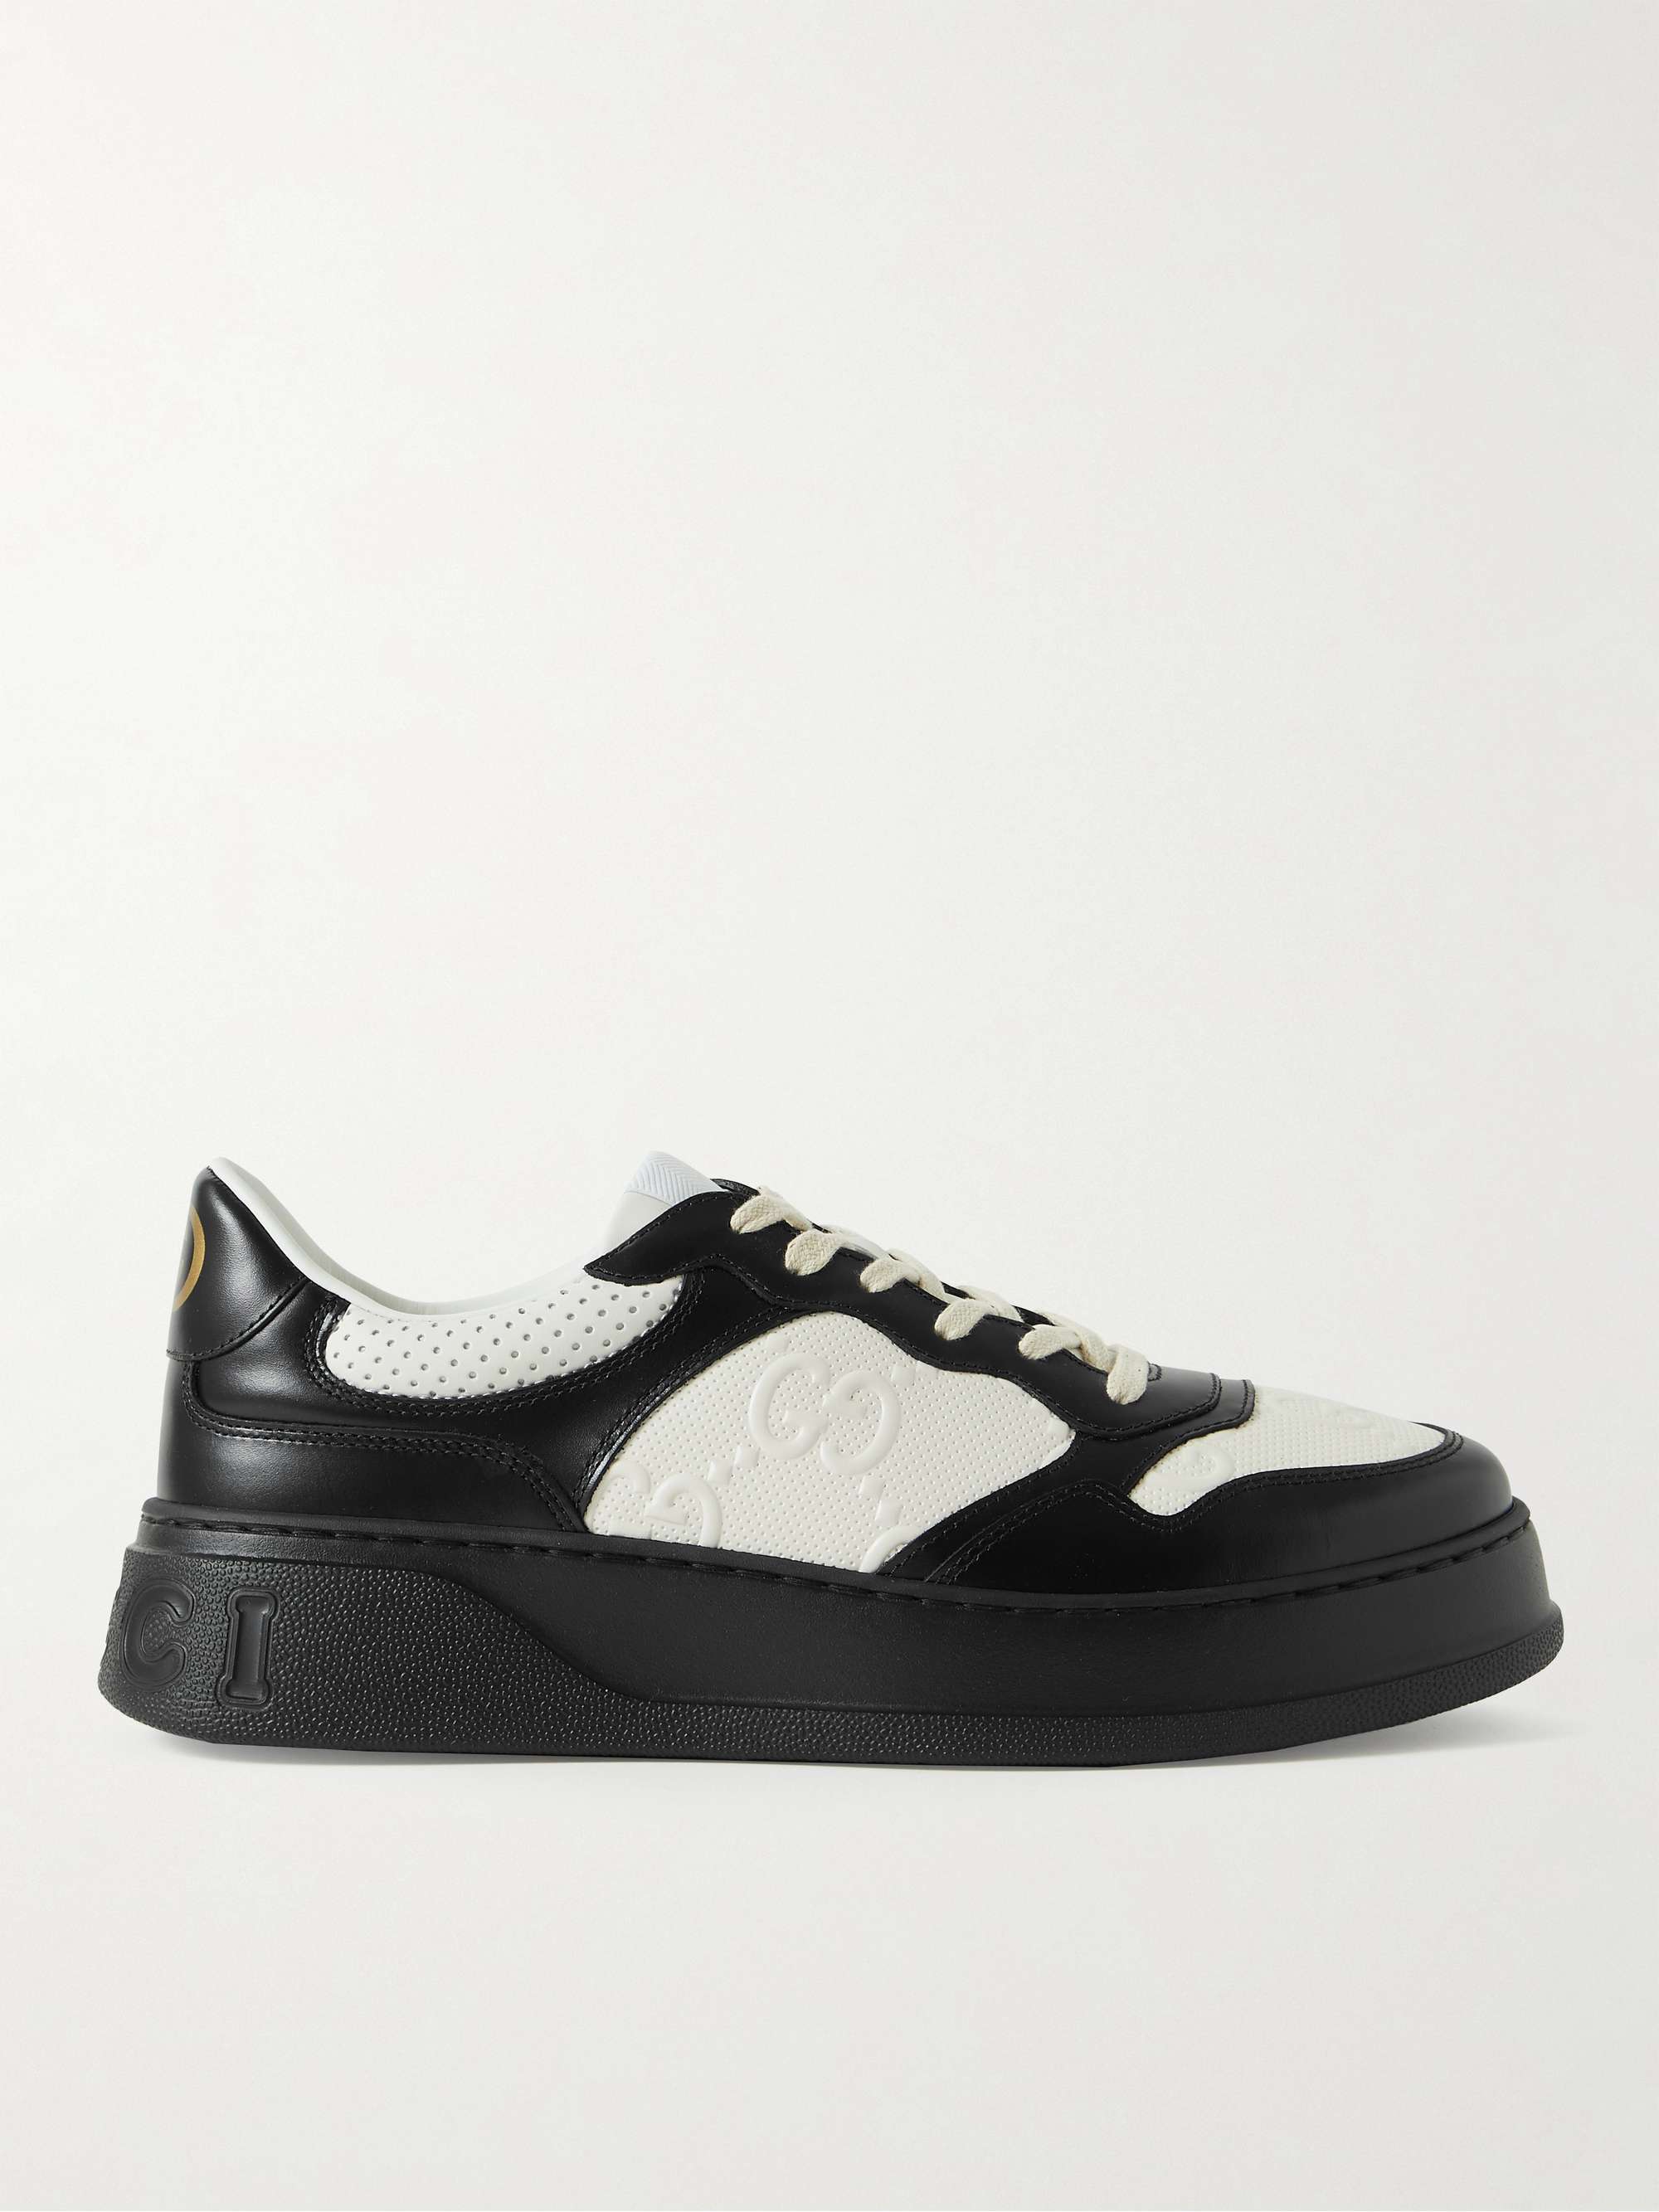 GUCCI Logo-Embossed Perforated Leather Sneakers for Men | MR PORTER